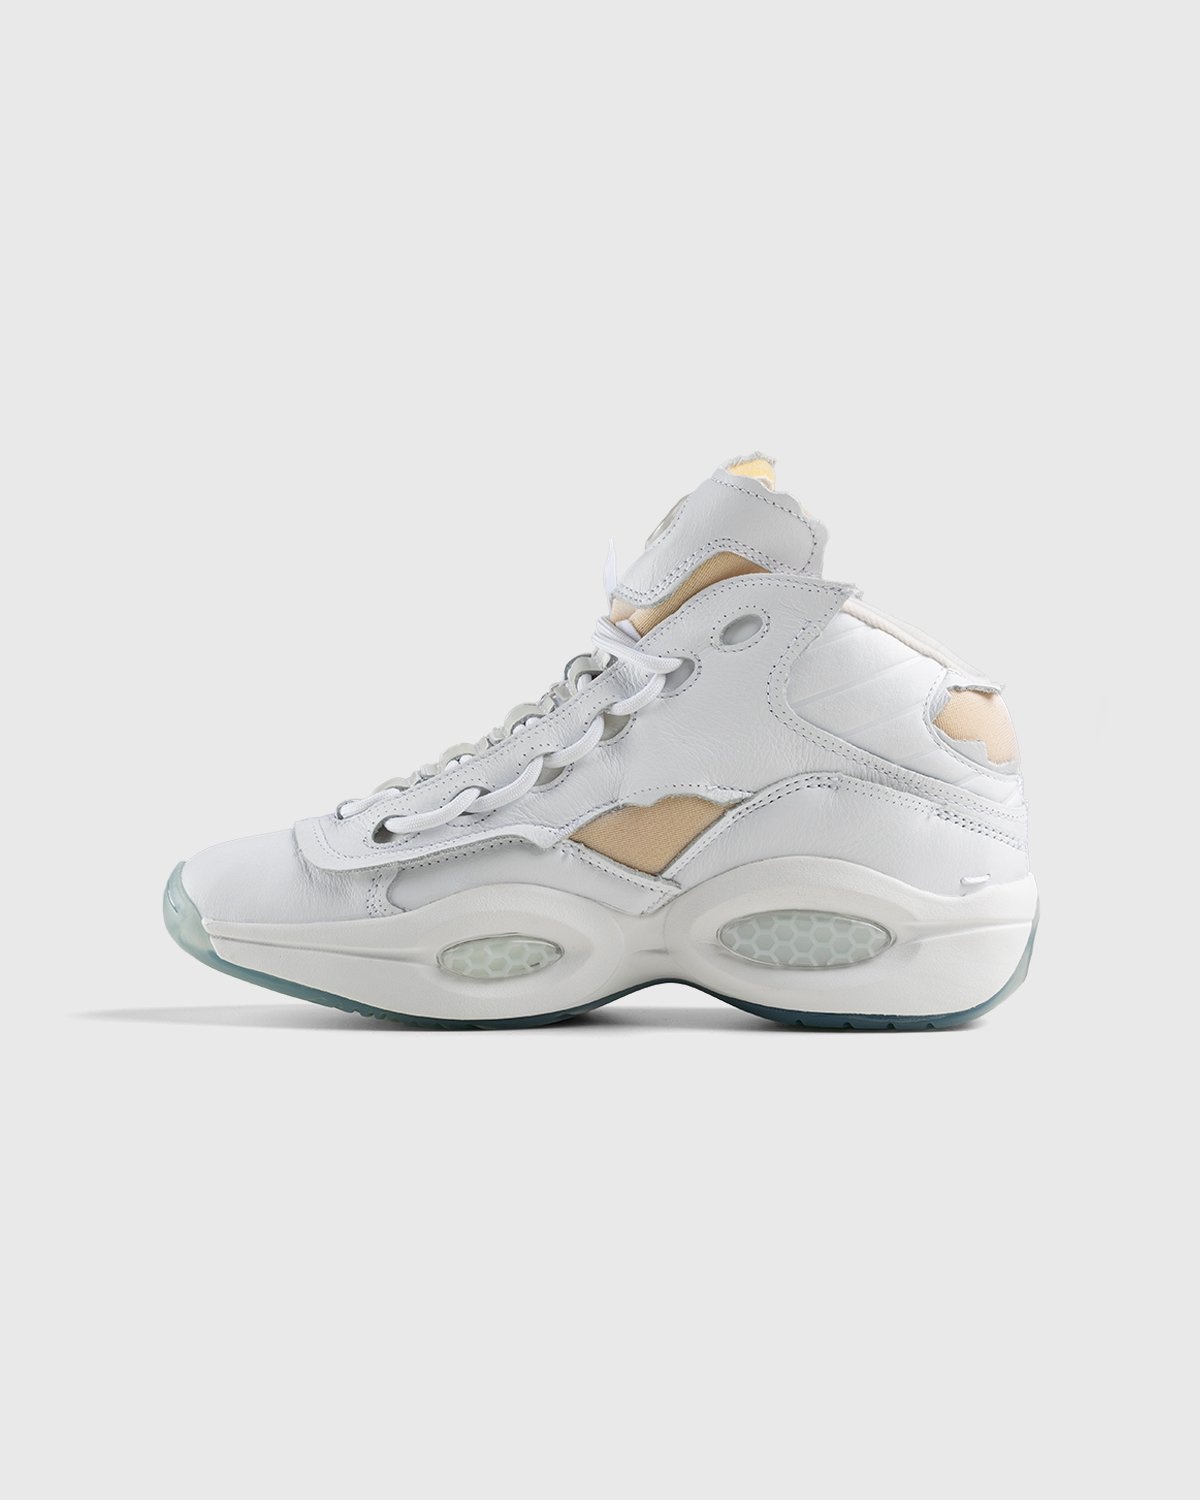 Reebok x Maison Margiela – Question Mid Memory Of White - High Top Sneakers - White - Image 2